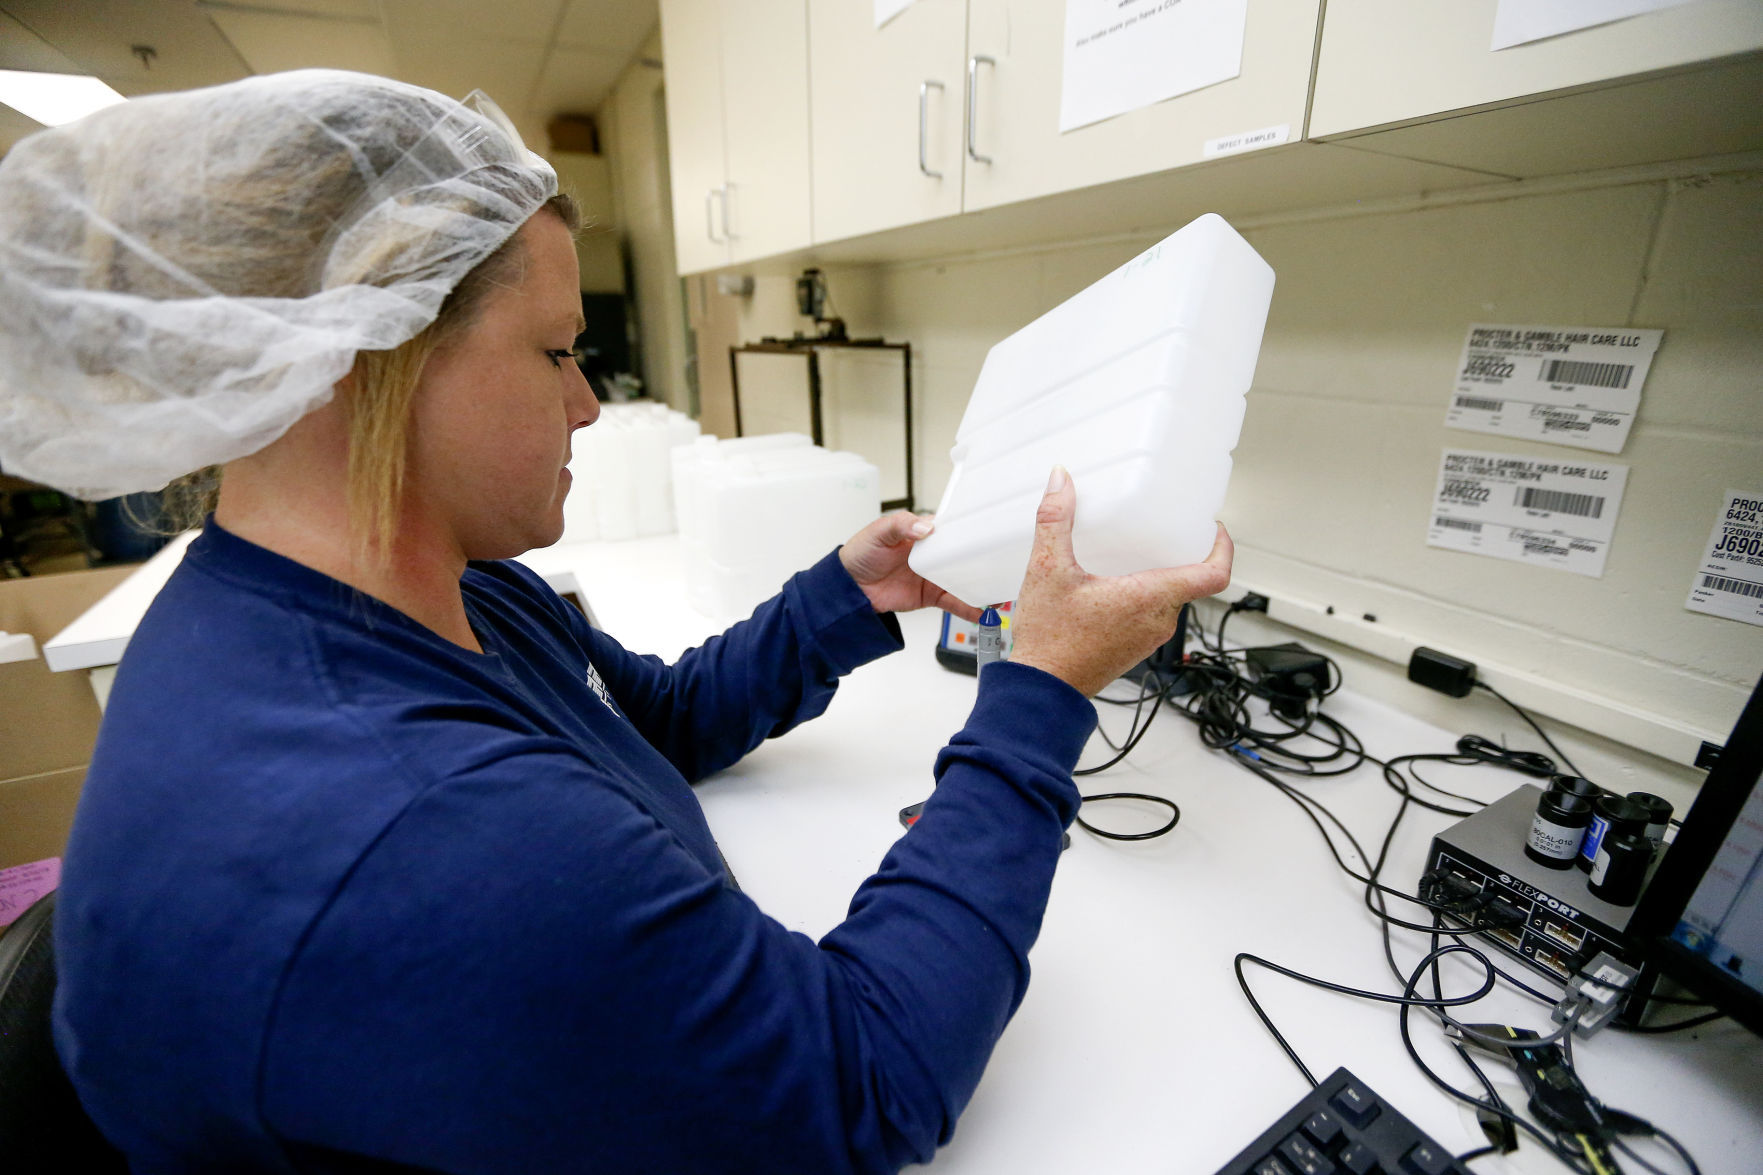 Katie Heinold measures the thickness consistency. PHOTO CREDIT: DAVE KETTERING